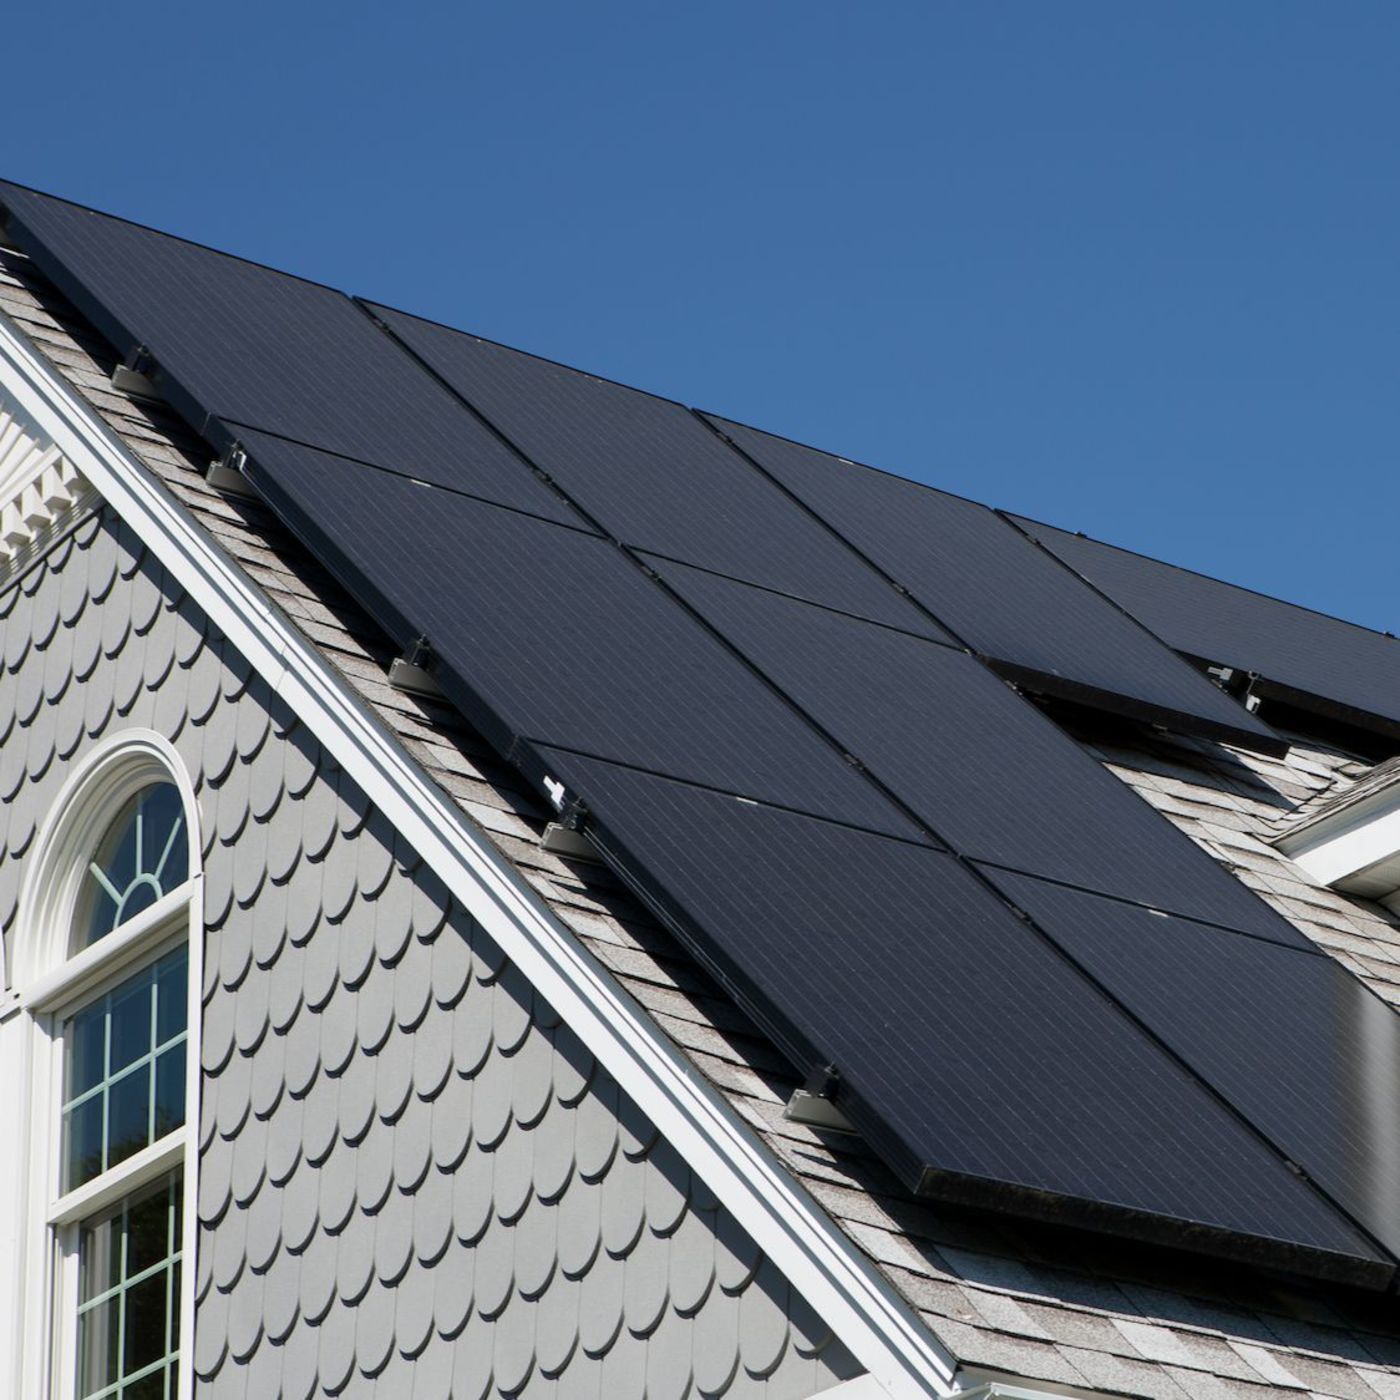 How Wealthy Are Residential Solar Customers?